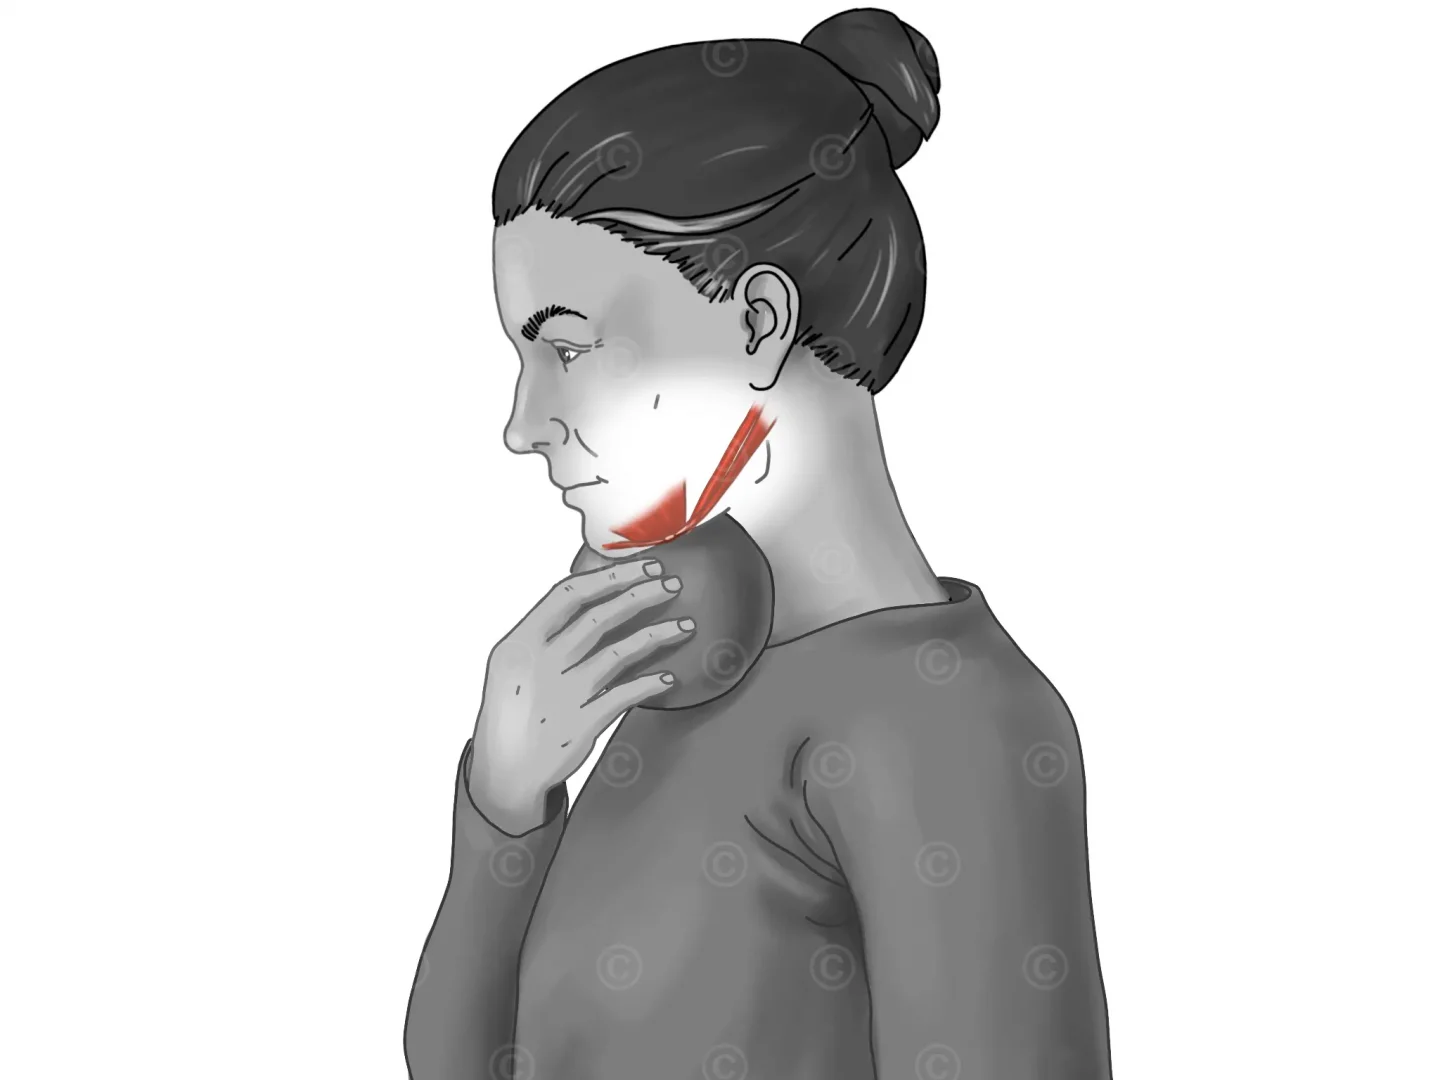 Chin tuck against resistance exercise - CTAR - dysphagia